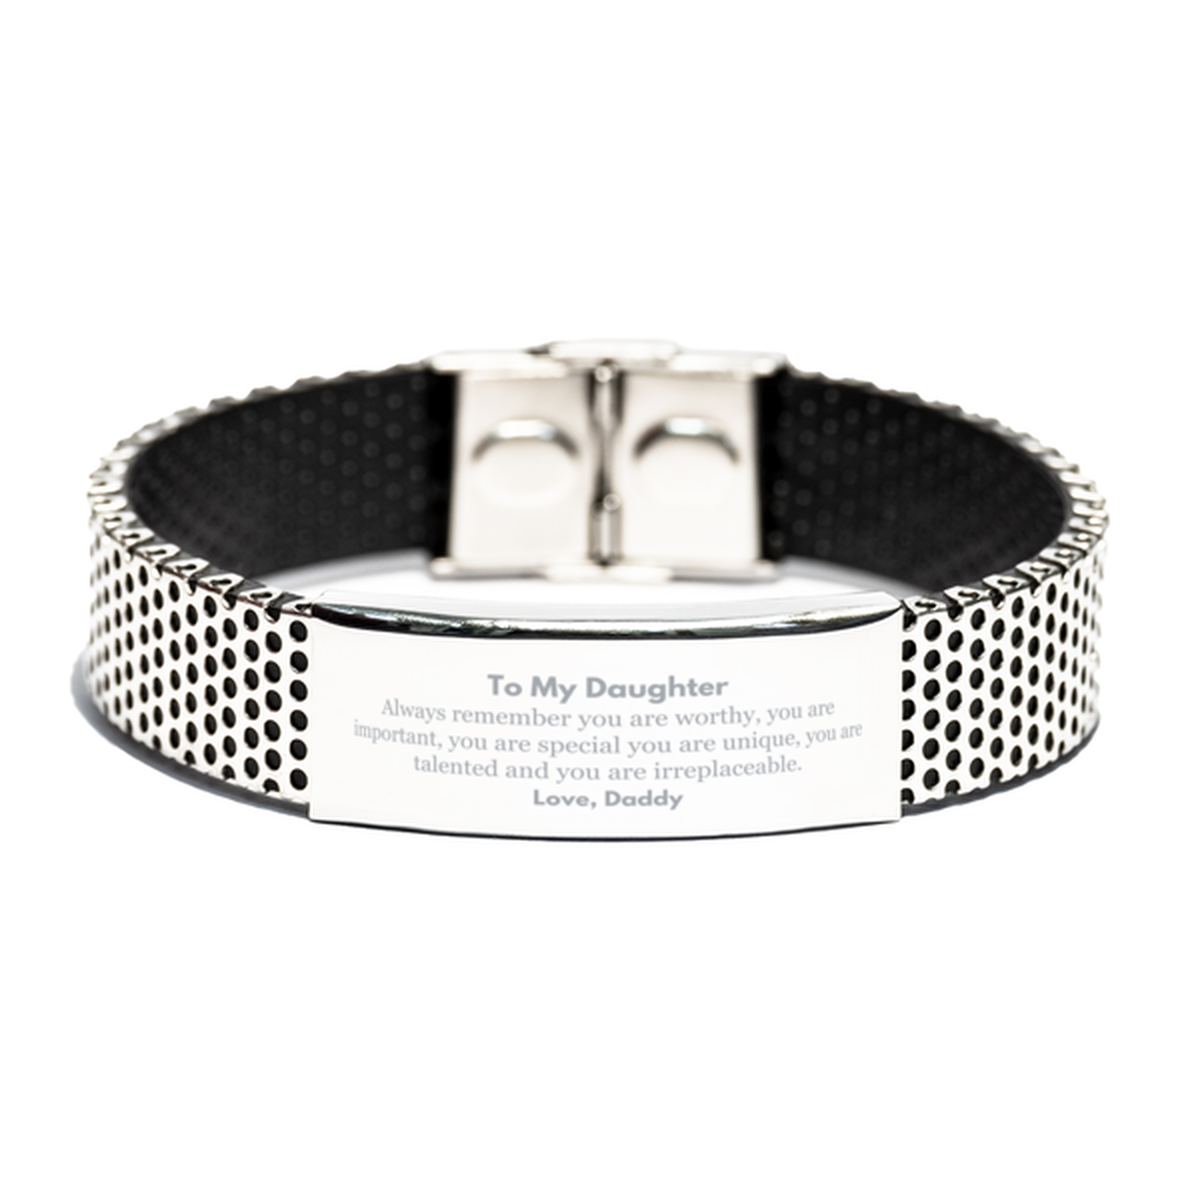 Daughter Birthday Gifts from Daddy, Inspirational Stainless Steel Bracelet for Daughter Christmas Graduation Gifts for Daughter Always remember you are worthy, you are important. Love, Daddy